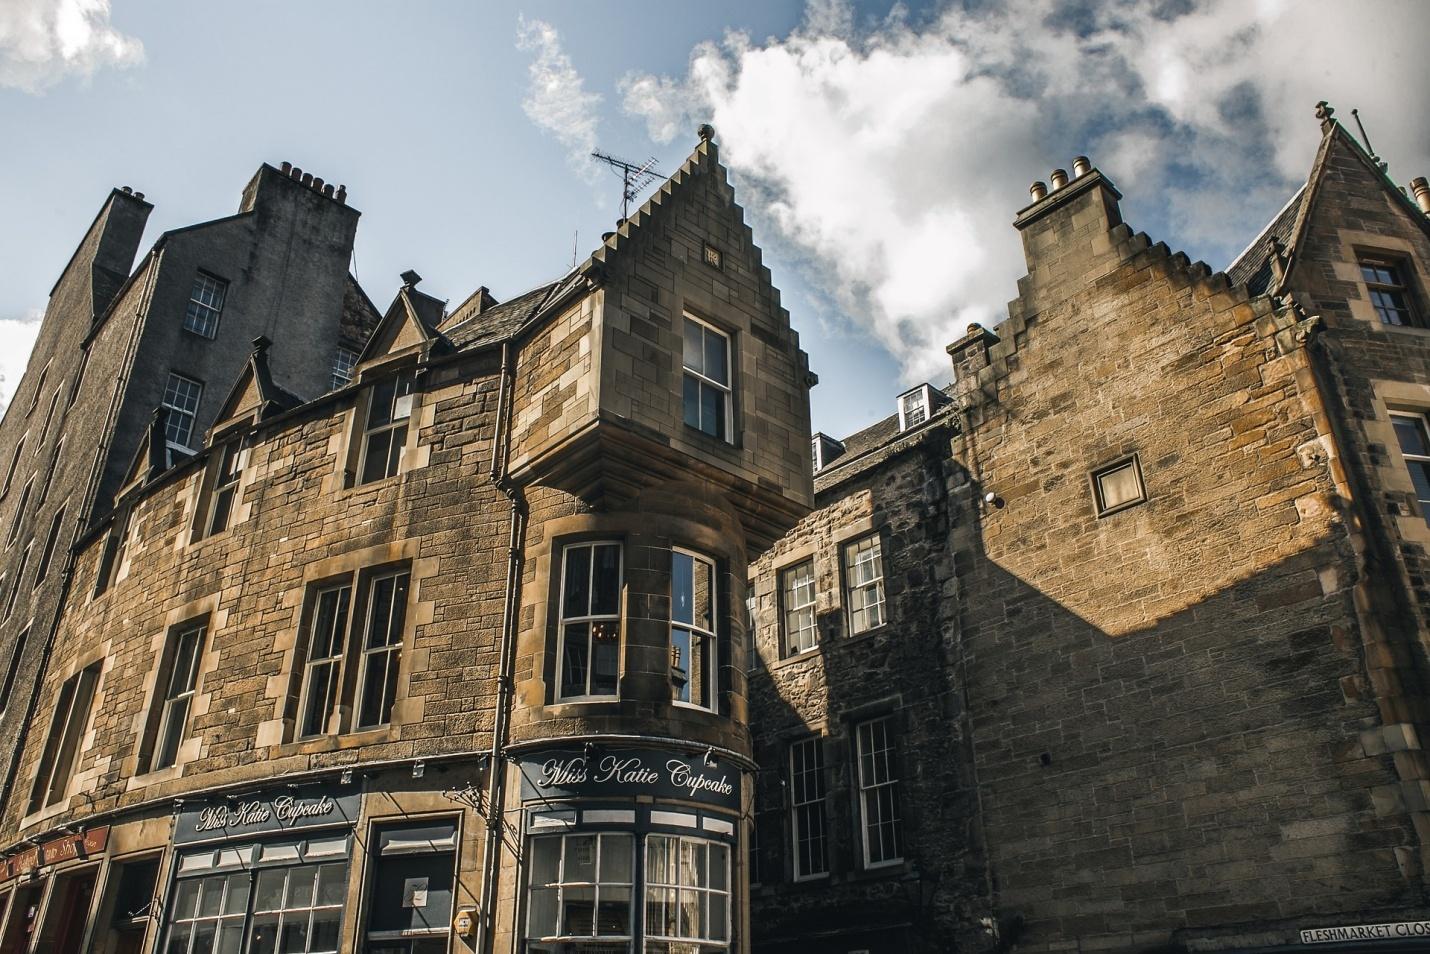 Edinburgh, Scotland offers stunning architecture and rich history, with steel windows adding a modern touch.